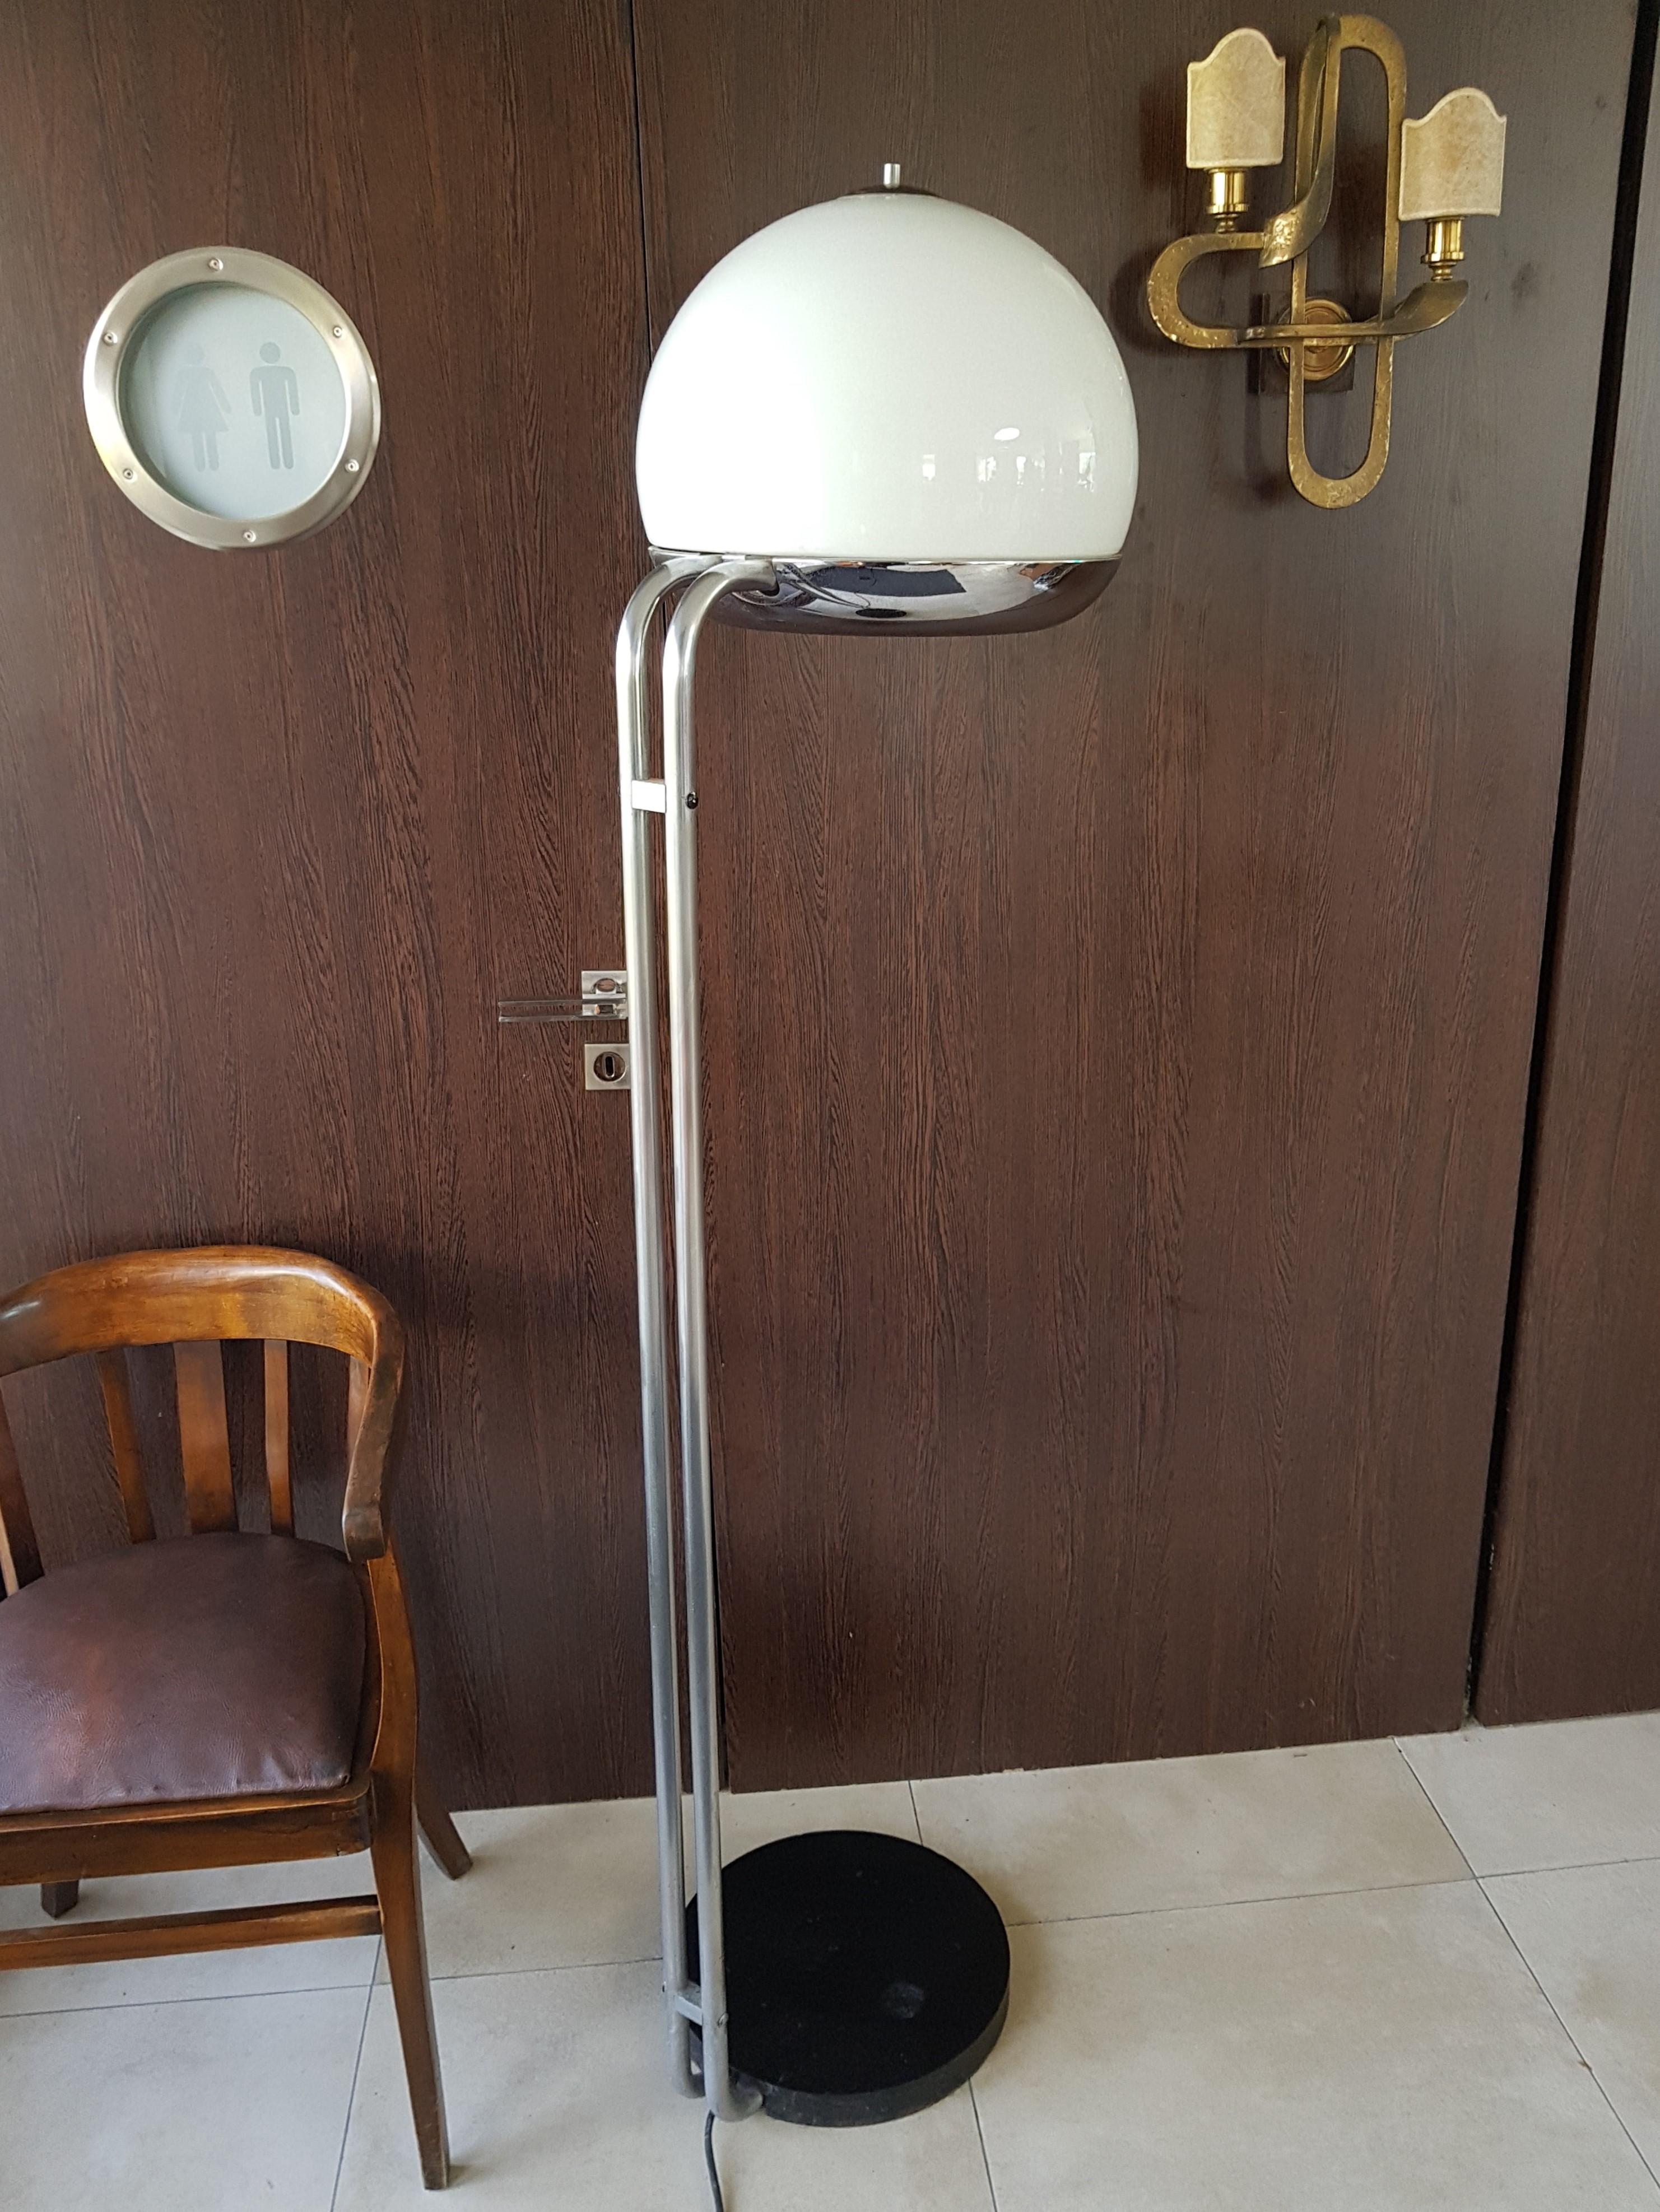 Mid-century floor lamp Reggiani, Italy, 1960s.

Glass shade. Two separate circuits for two bulbs. Chrome with patina.
Very heavy base.